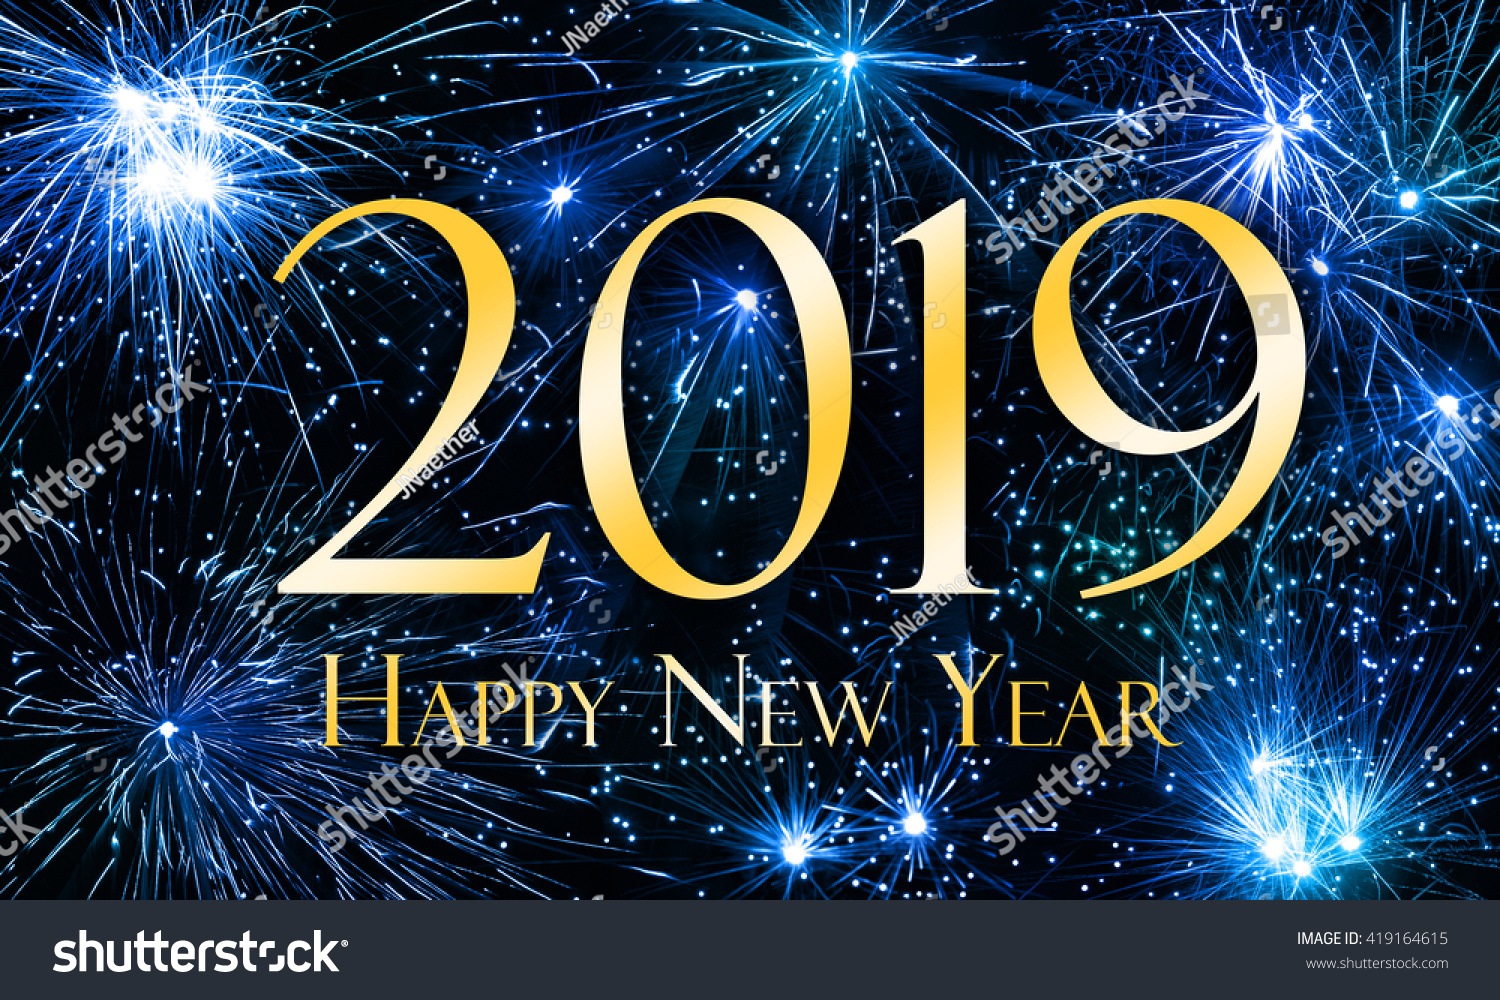 2019 new year  28 images  image gallery new year 2019, new year 2019 clipart images pictures 